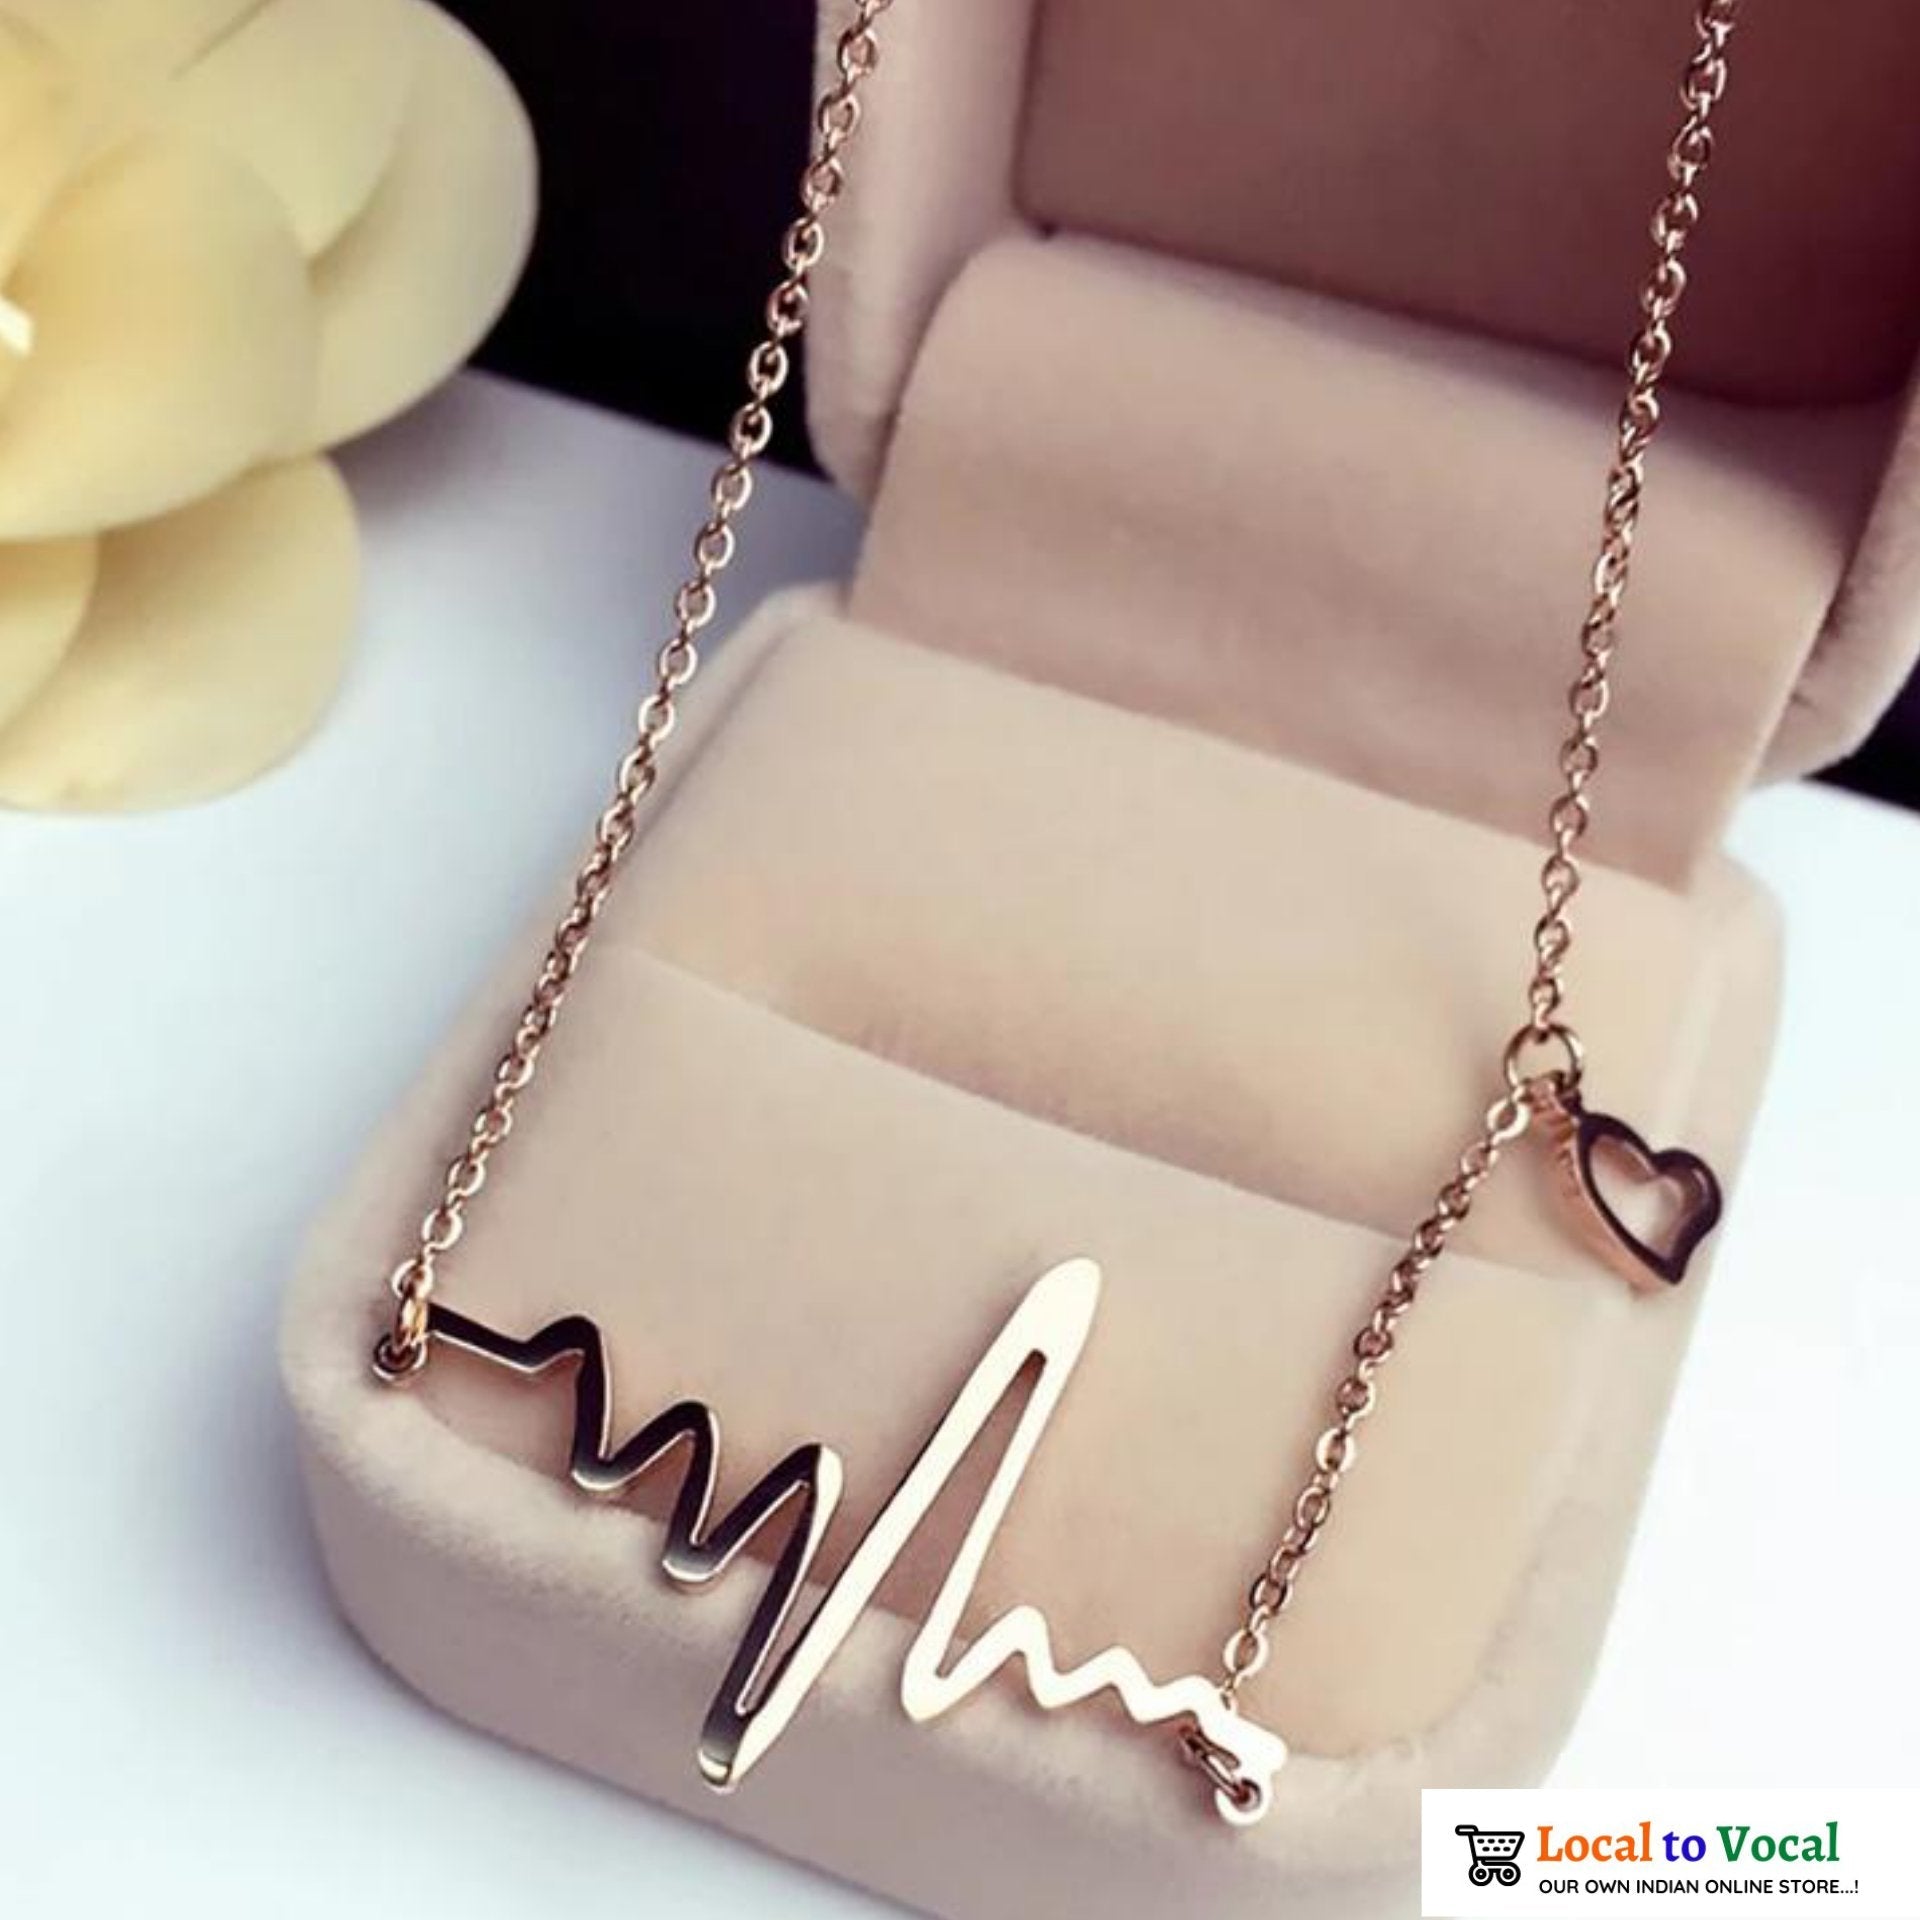 Heartbeat Necklace (A Memorable Gift) - Local to Vocal